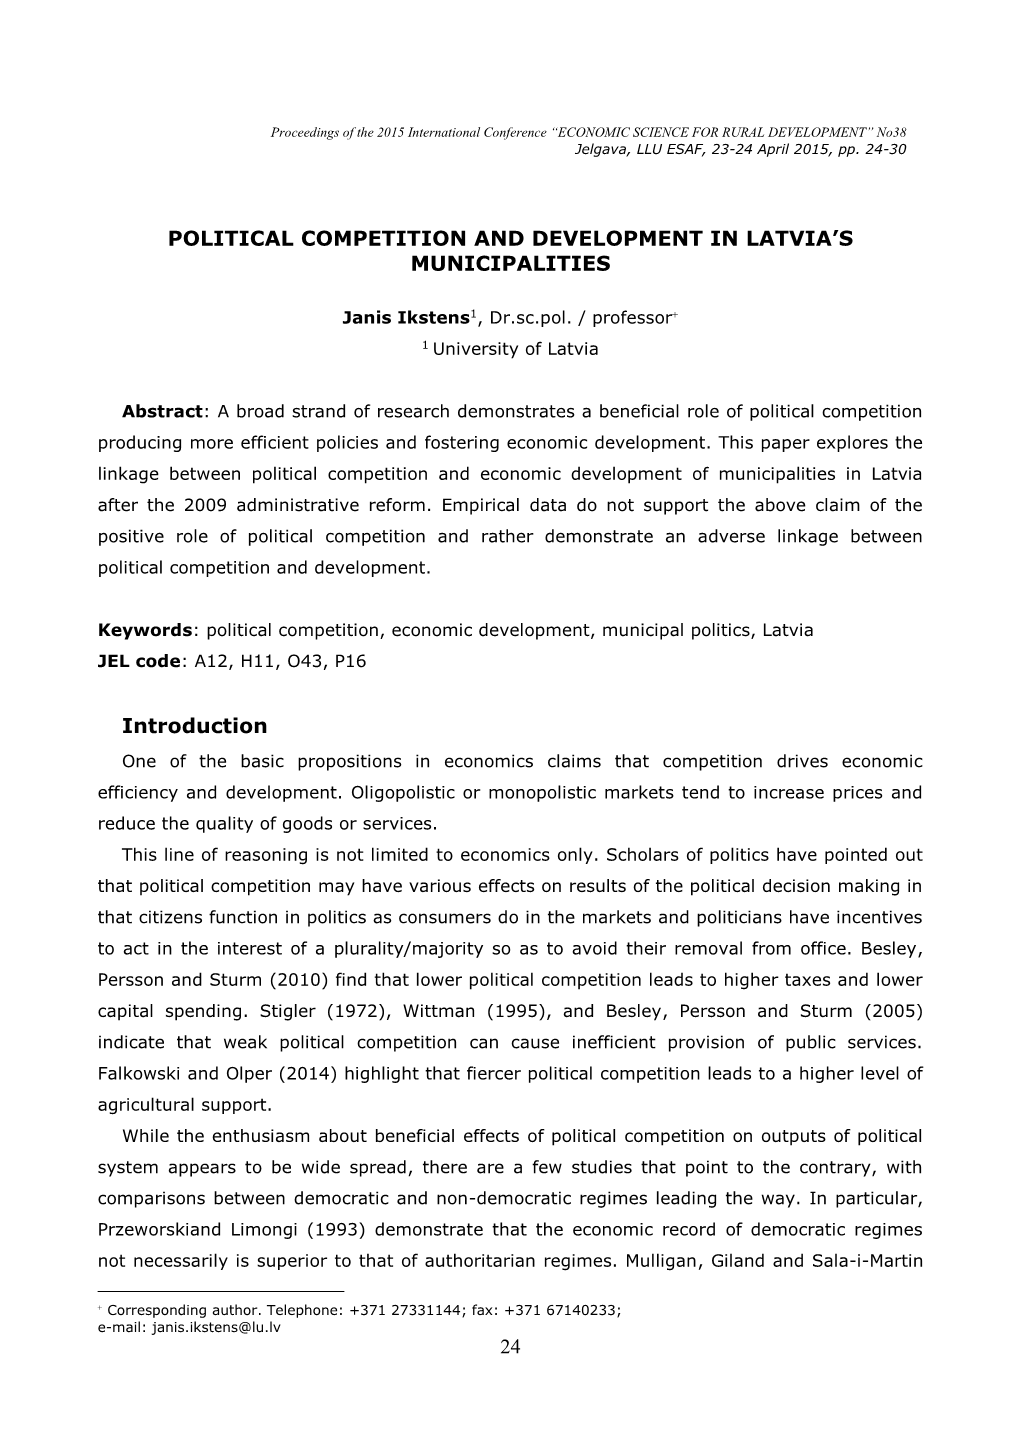 Political Competition and Development in Latvia's Municipalities